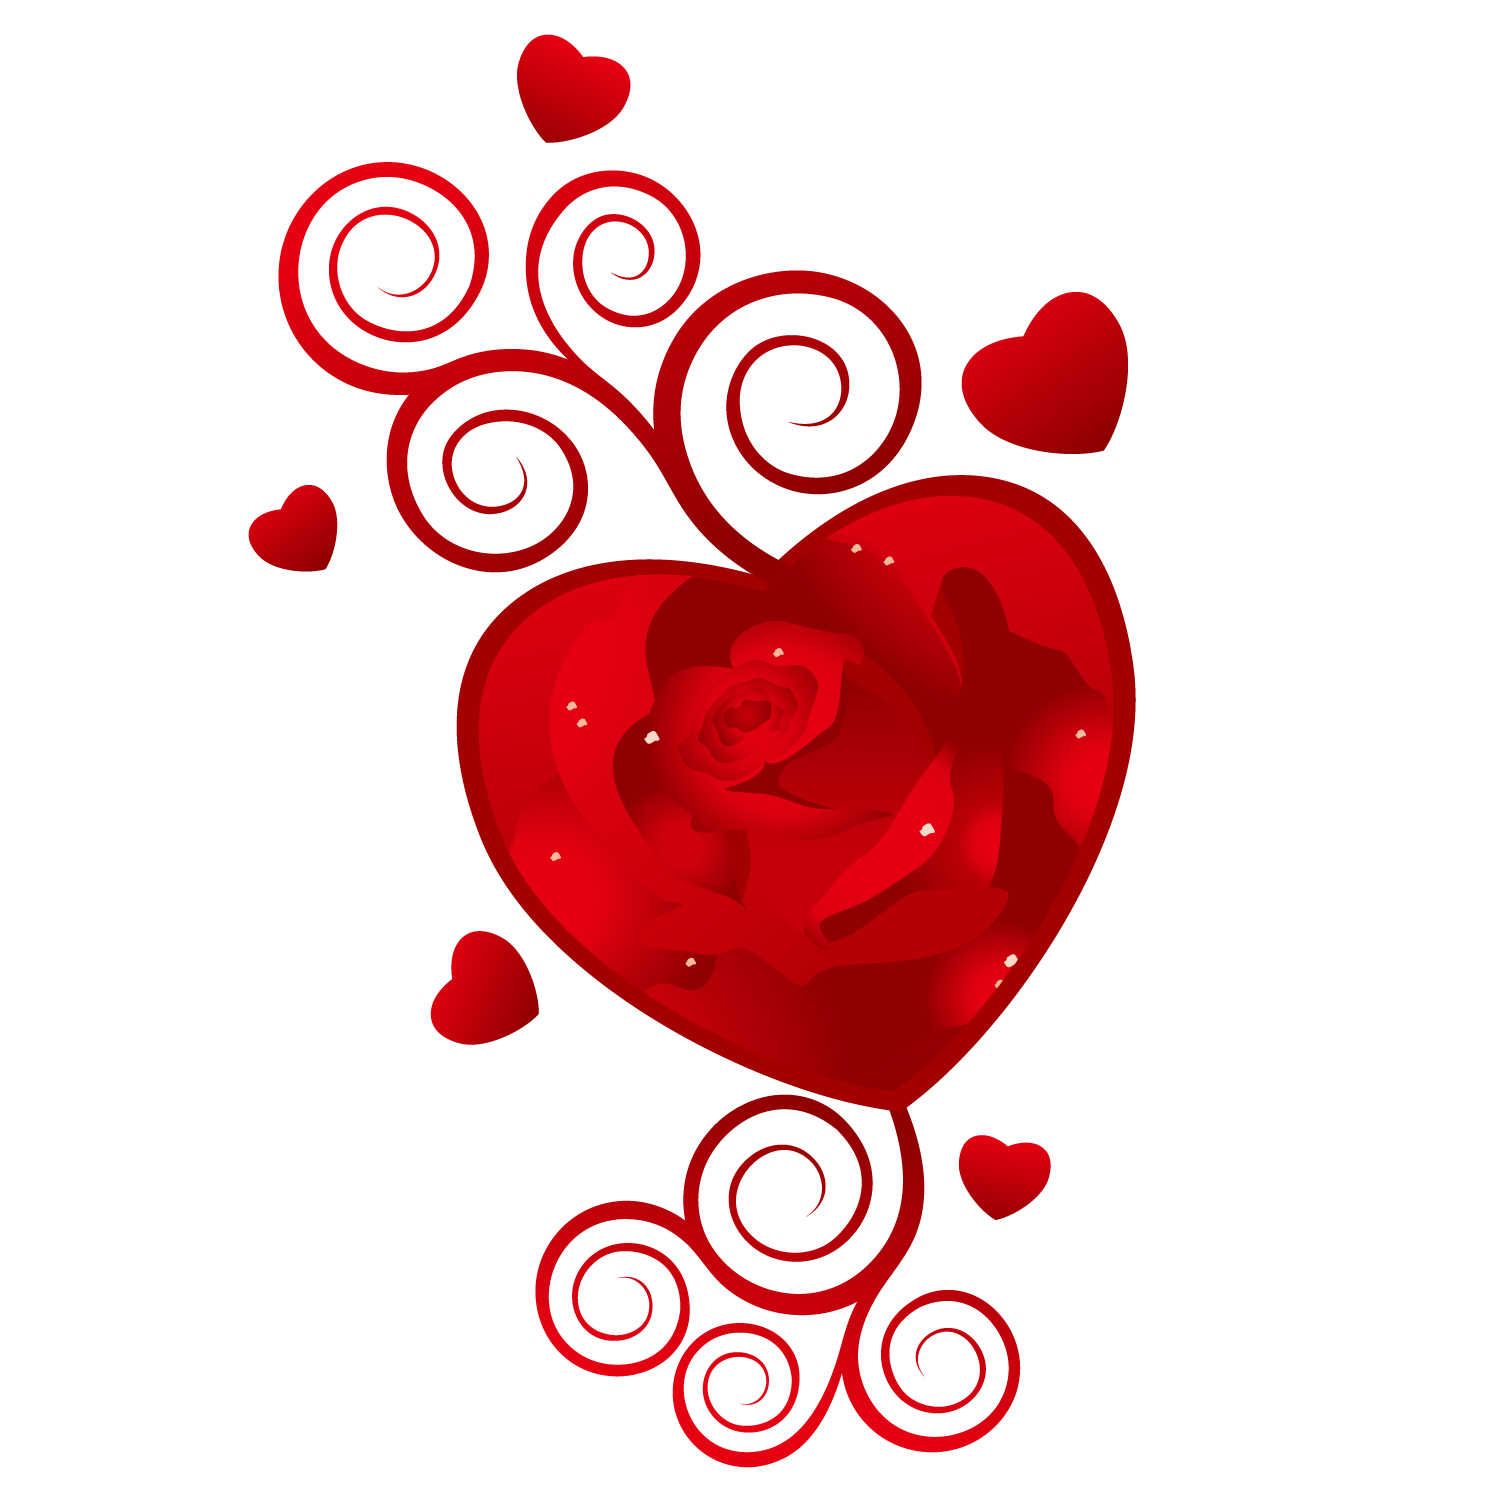 Heart February 14 Wish Valentines Vector Rose Clipart